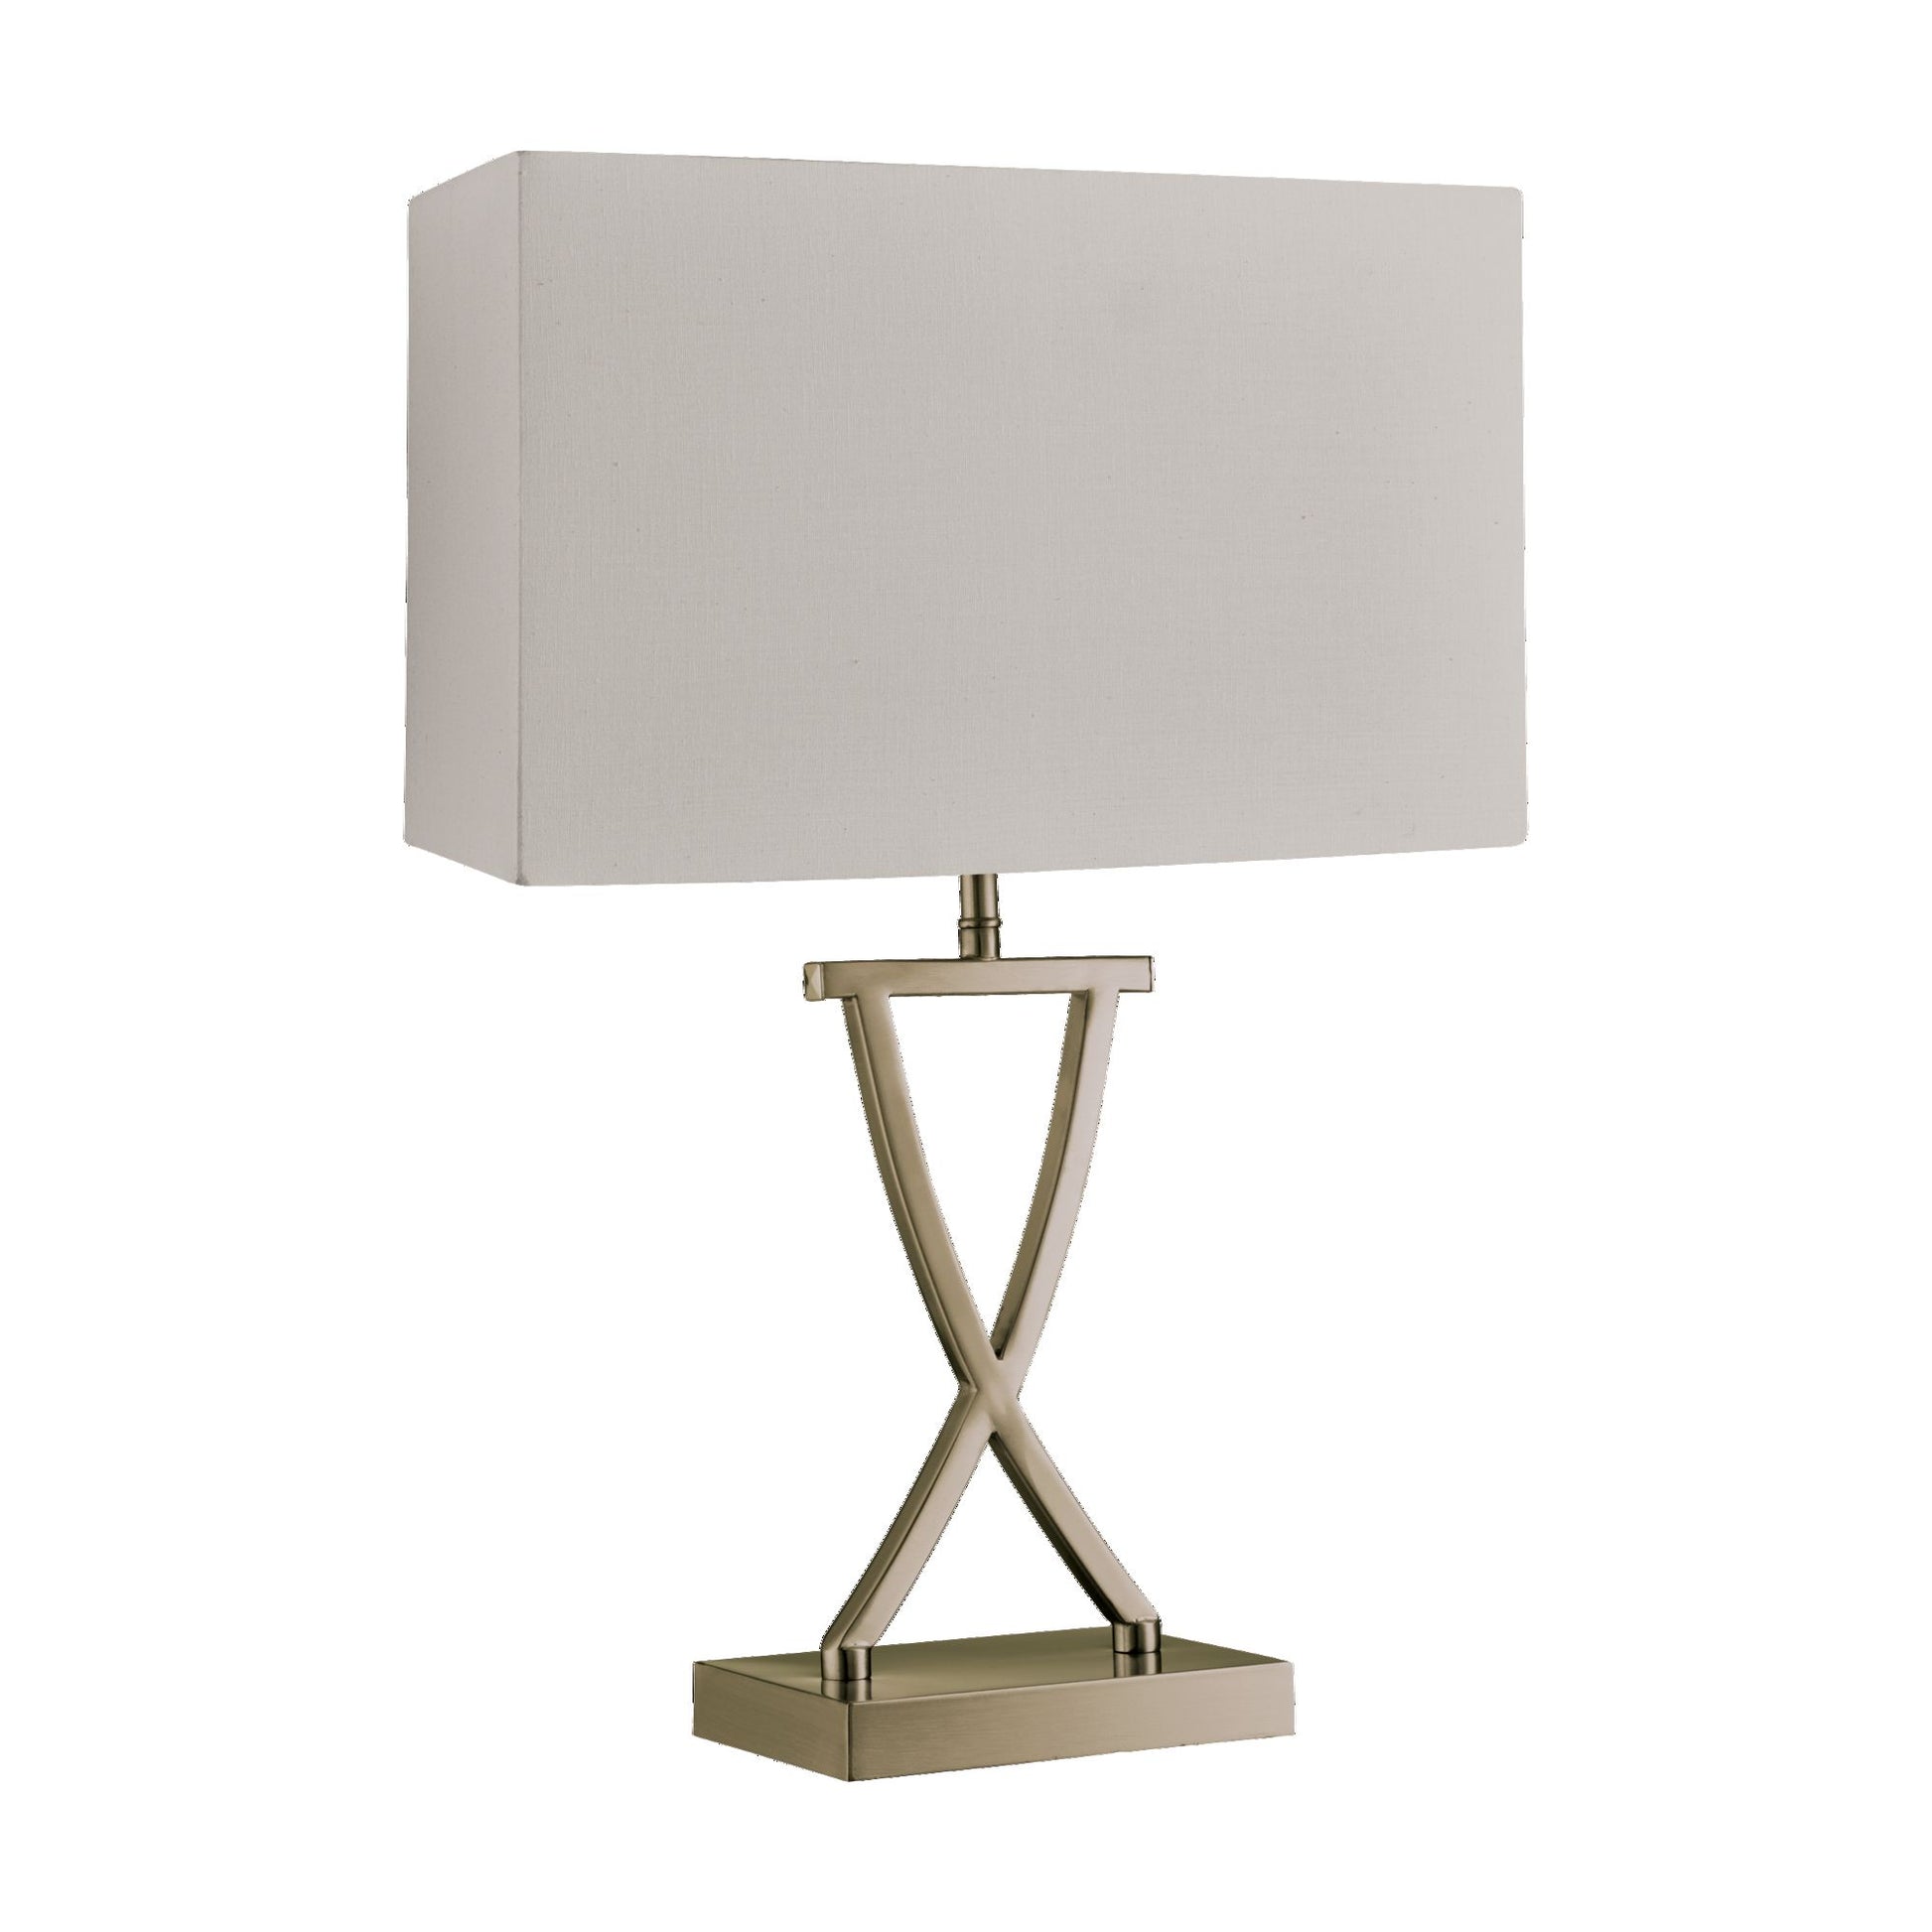 Club Antique Brass & White Fabric Shade Table Lamp